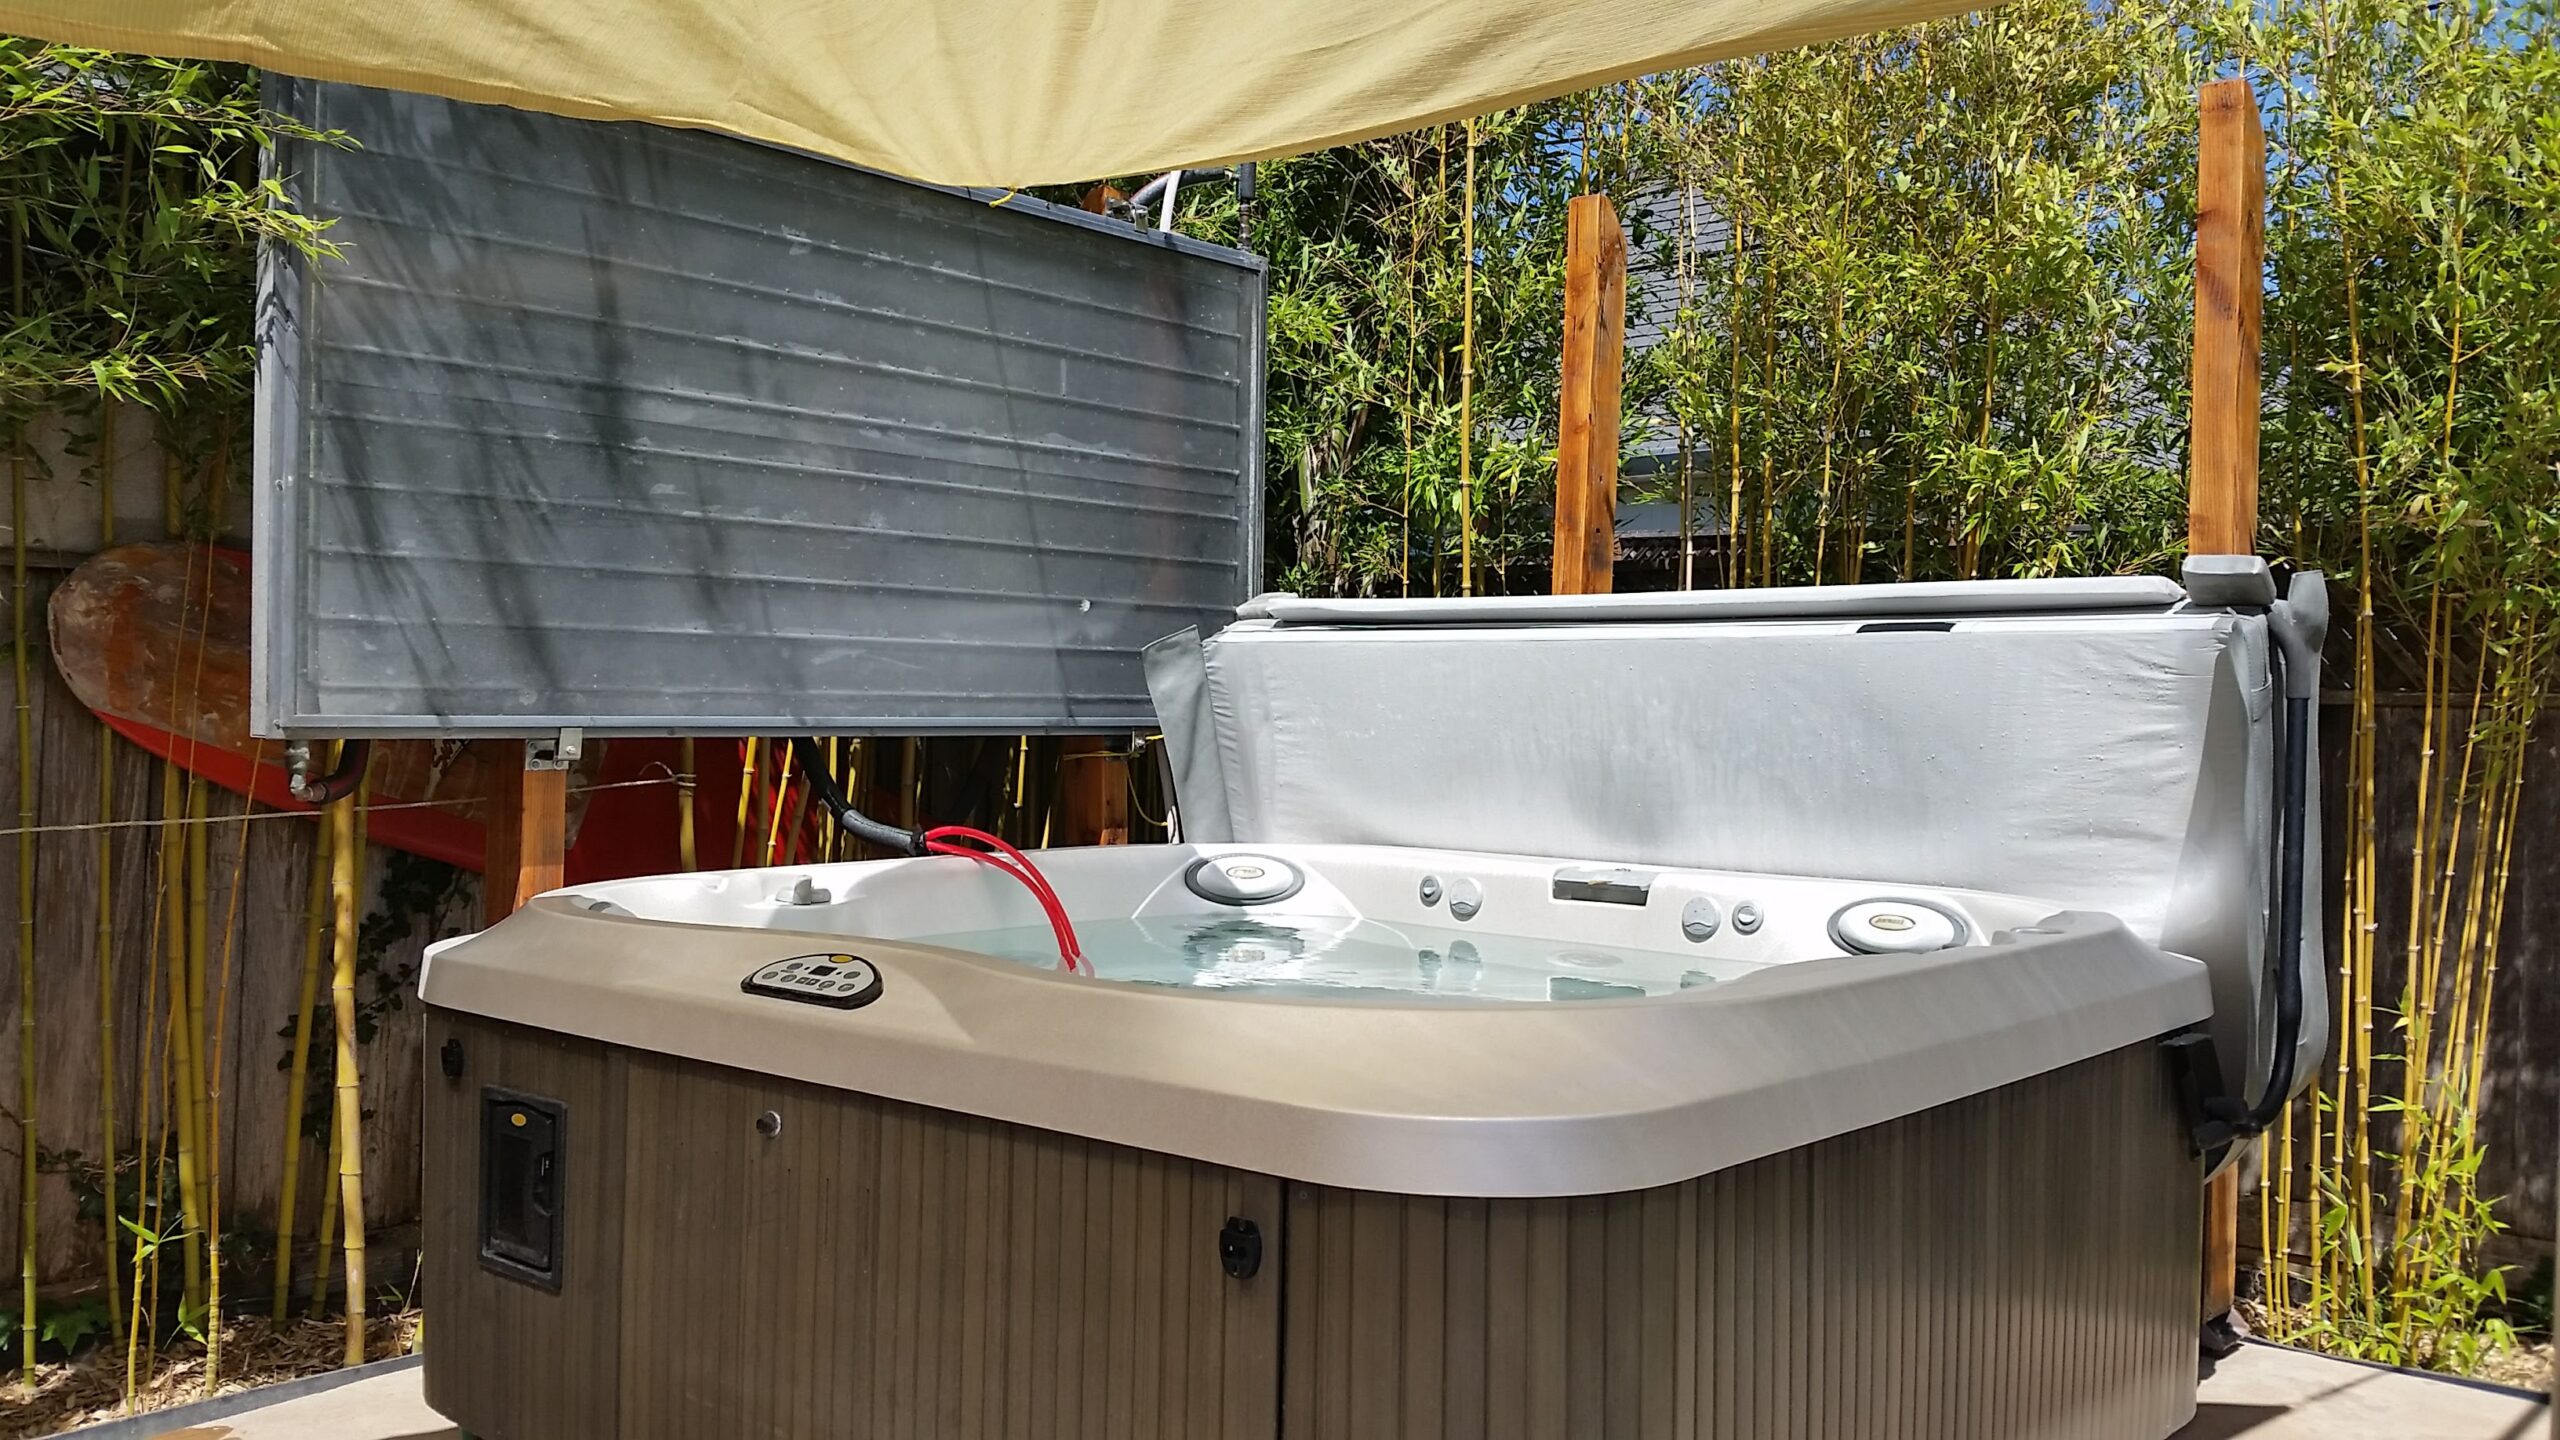 A flat plate solar collector mounted above a hot tub in order to drain back into the tub when not pumping